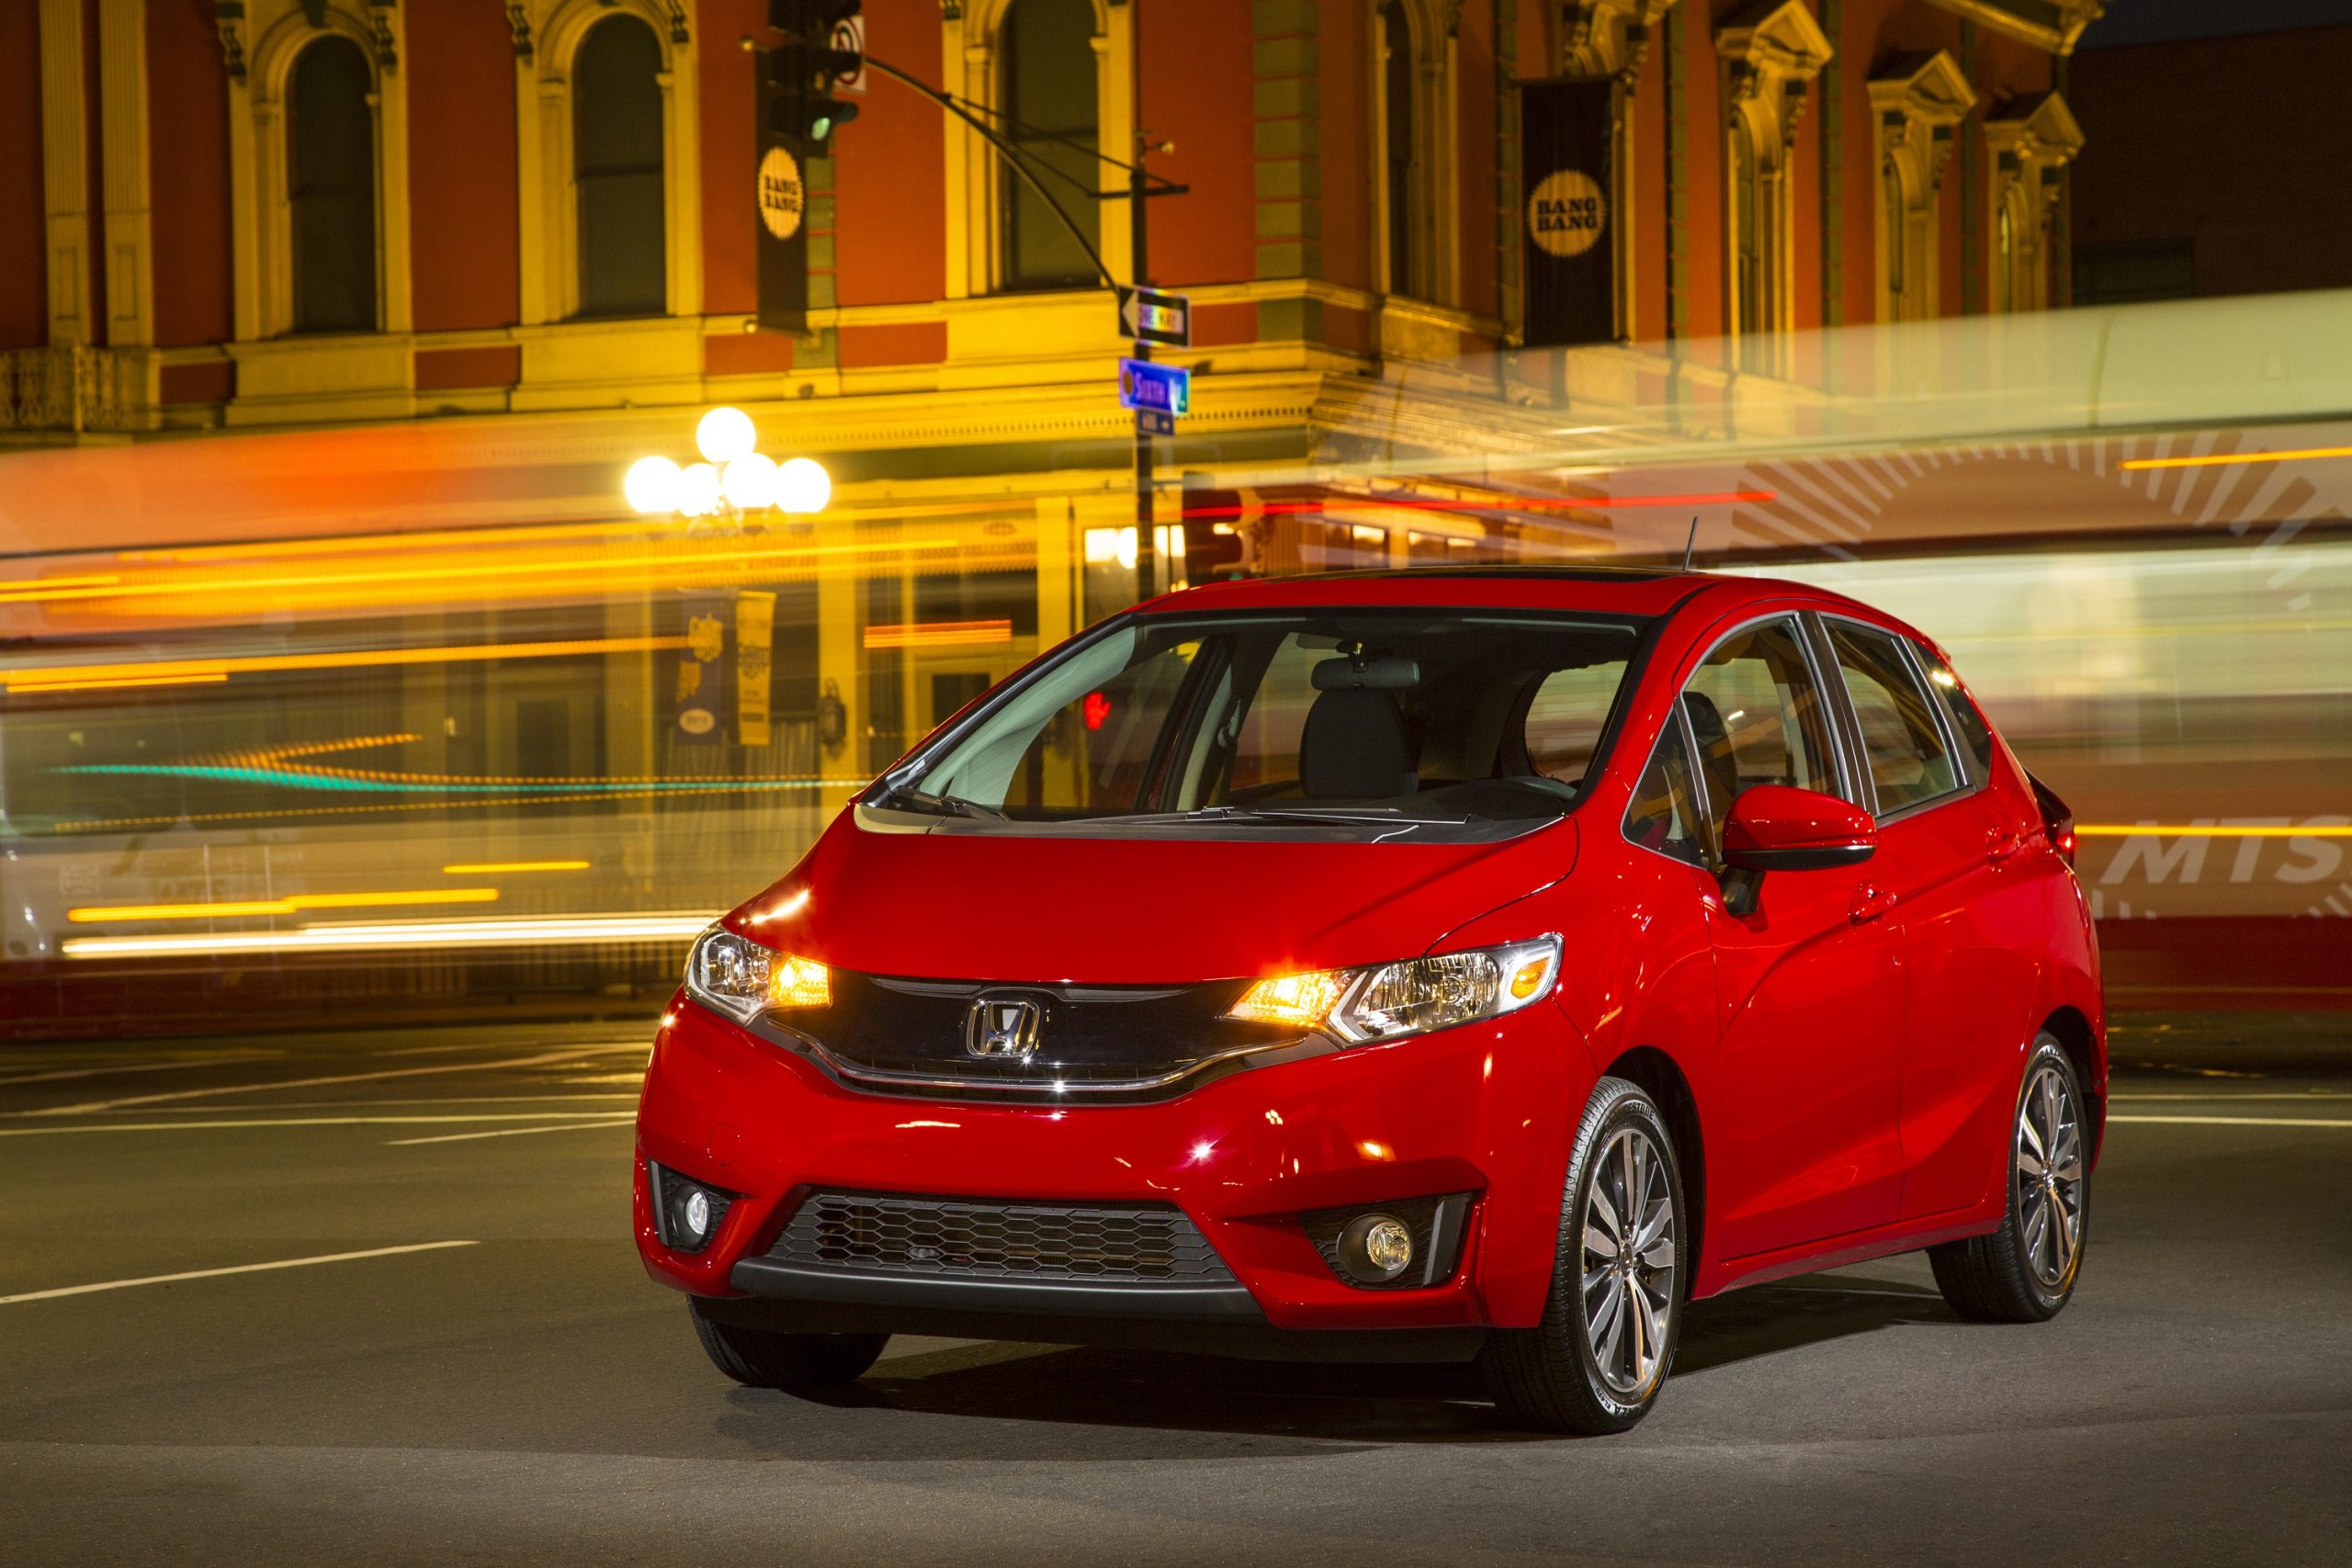 A red 2015 Honda Fit shot on a long exposure setting at night, making the traffic behind blur